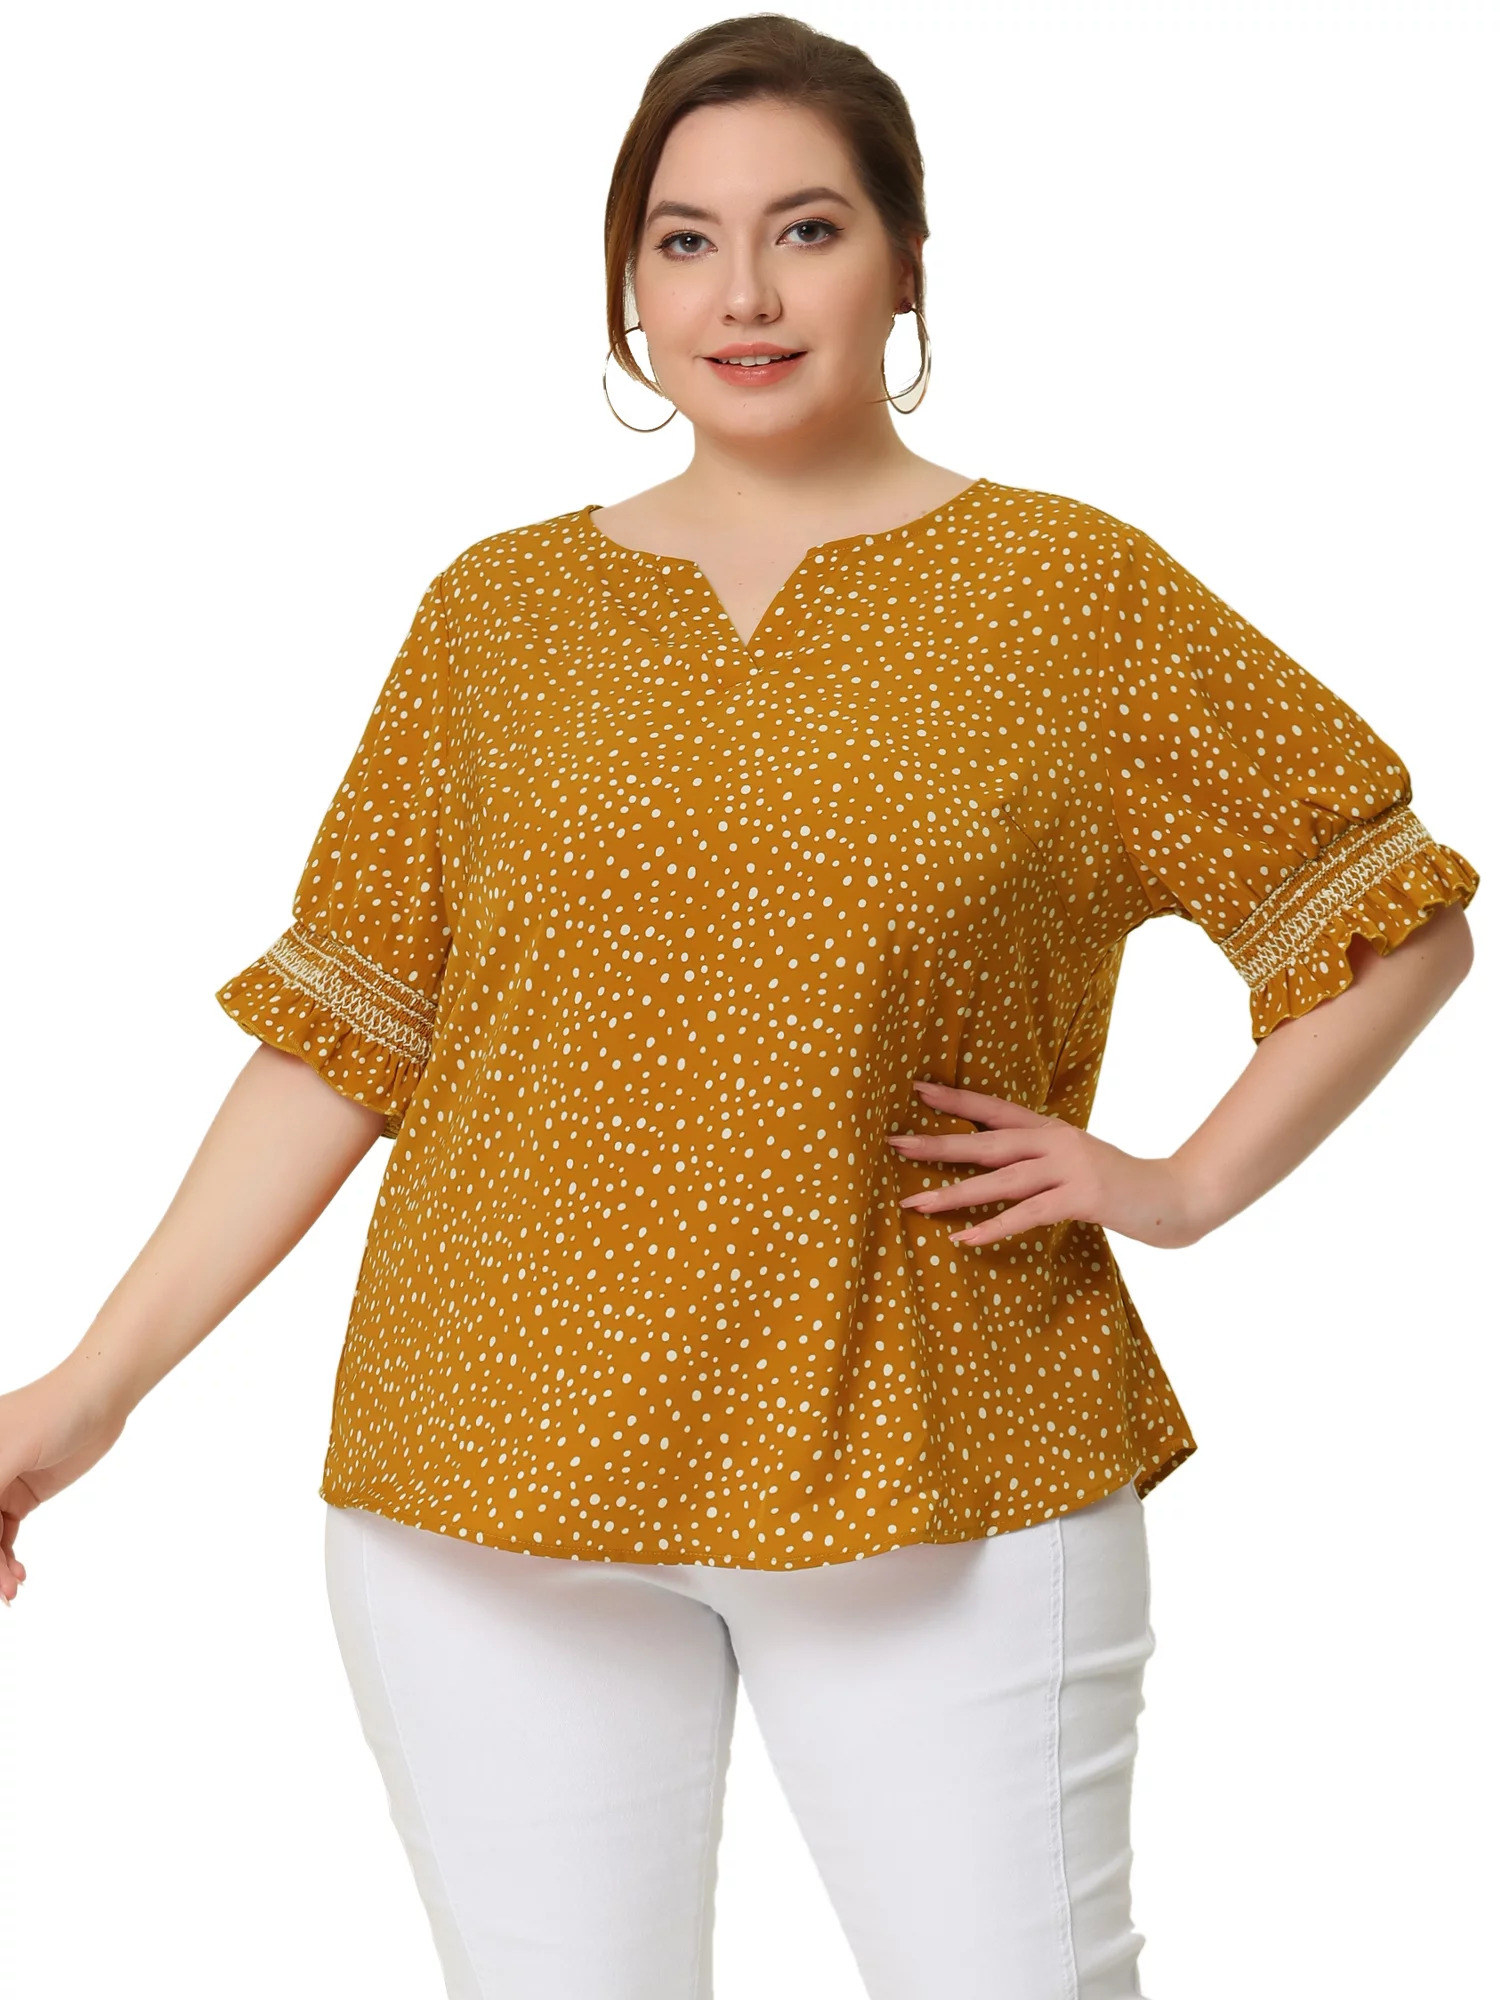 Model wearing the yellow blouse